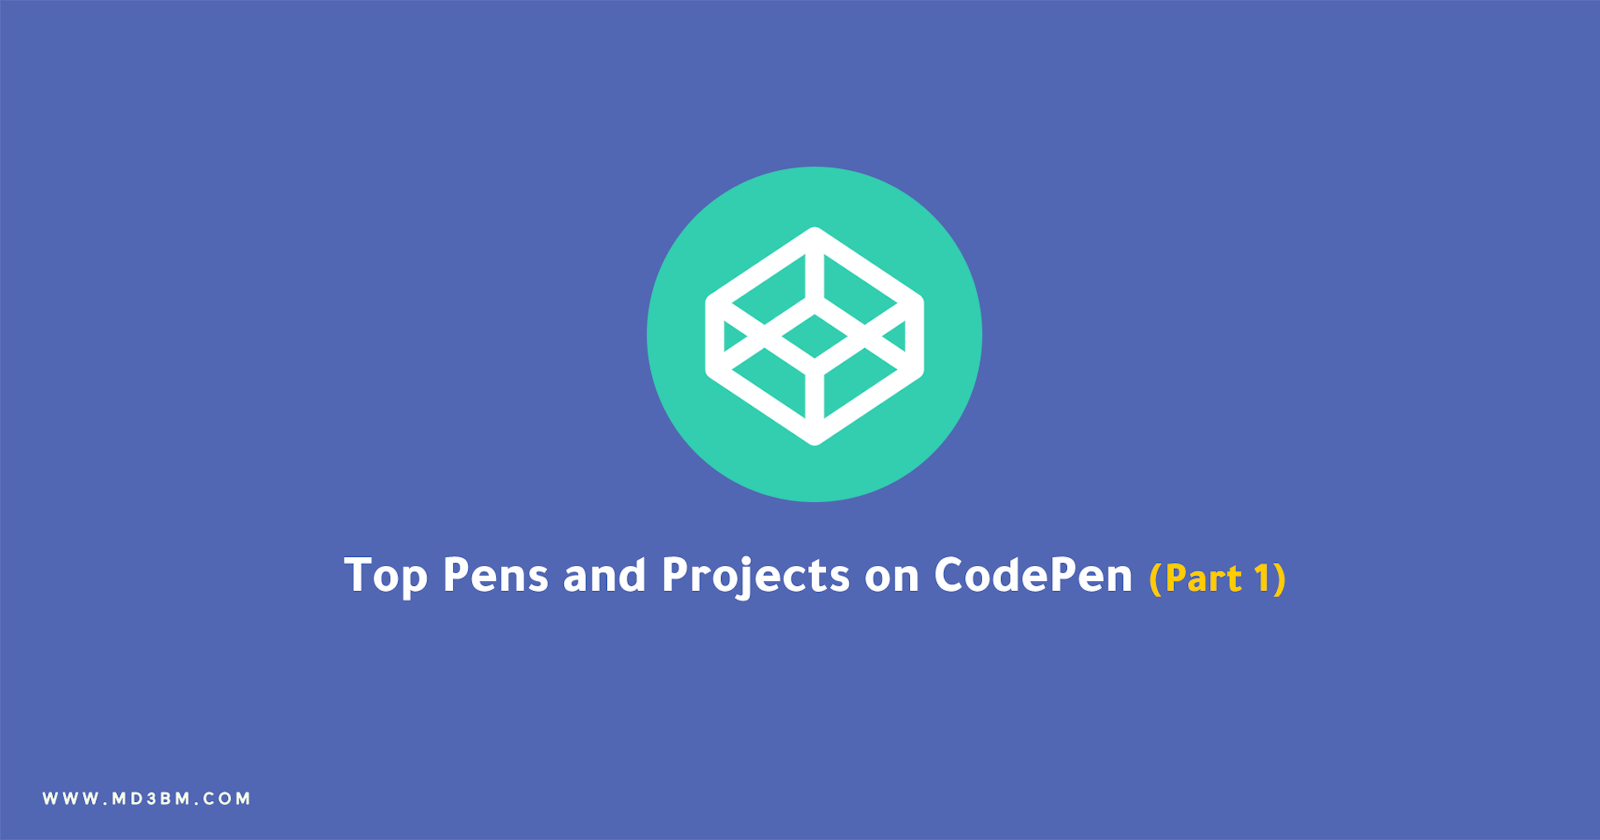 Top Pens and Projects on CodePen (Part 1)